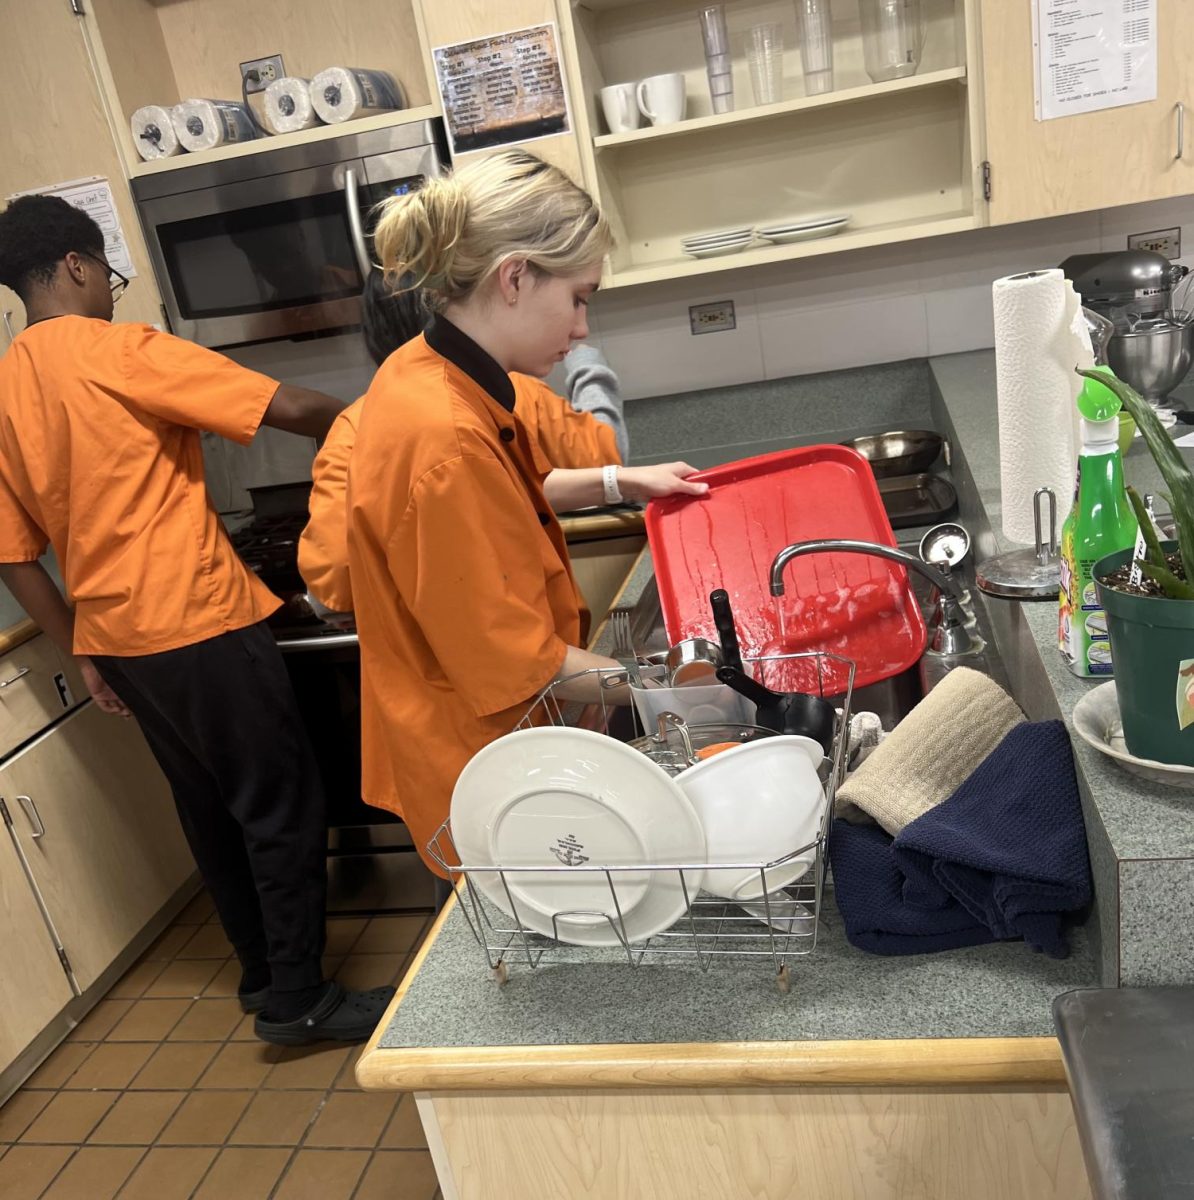 Senior Kamryn Haake washes dishes in her Intro to Culinary Arts class.  Seniors can take this class if they have been taking other culinary classes, including Nutrition and Foods 2.